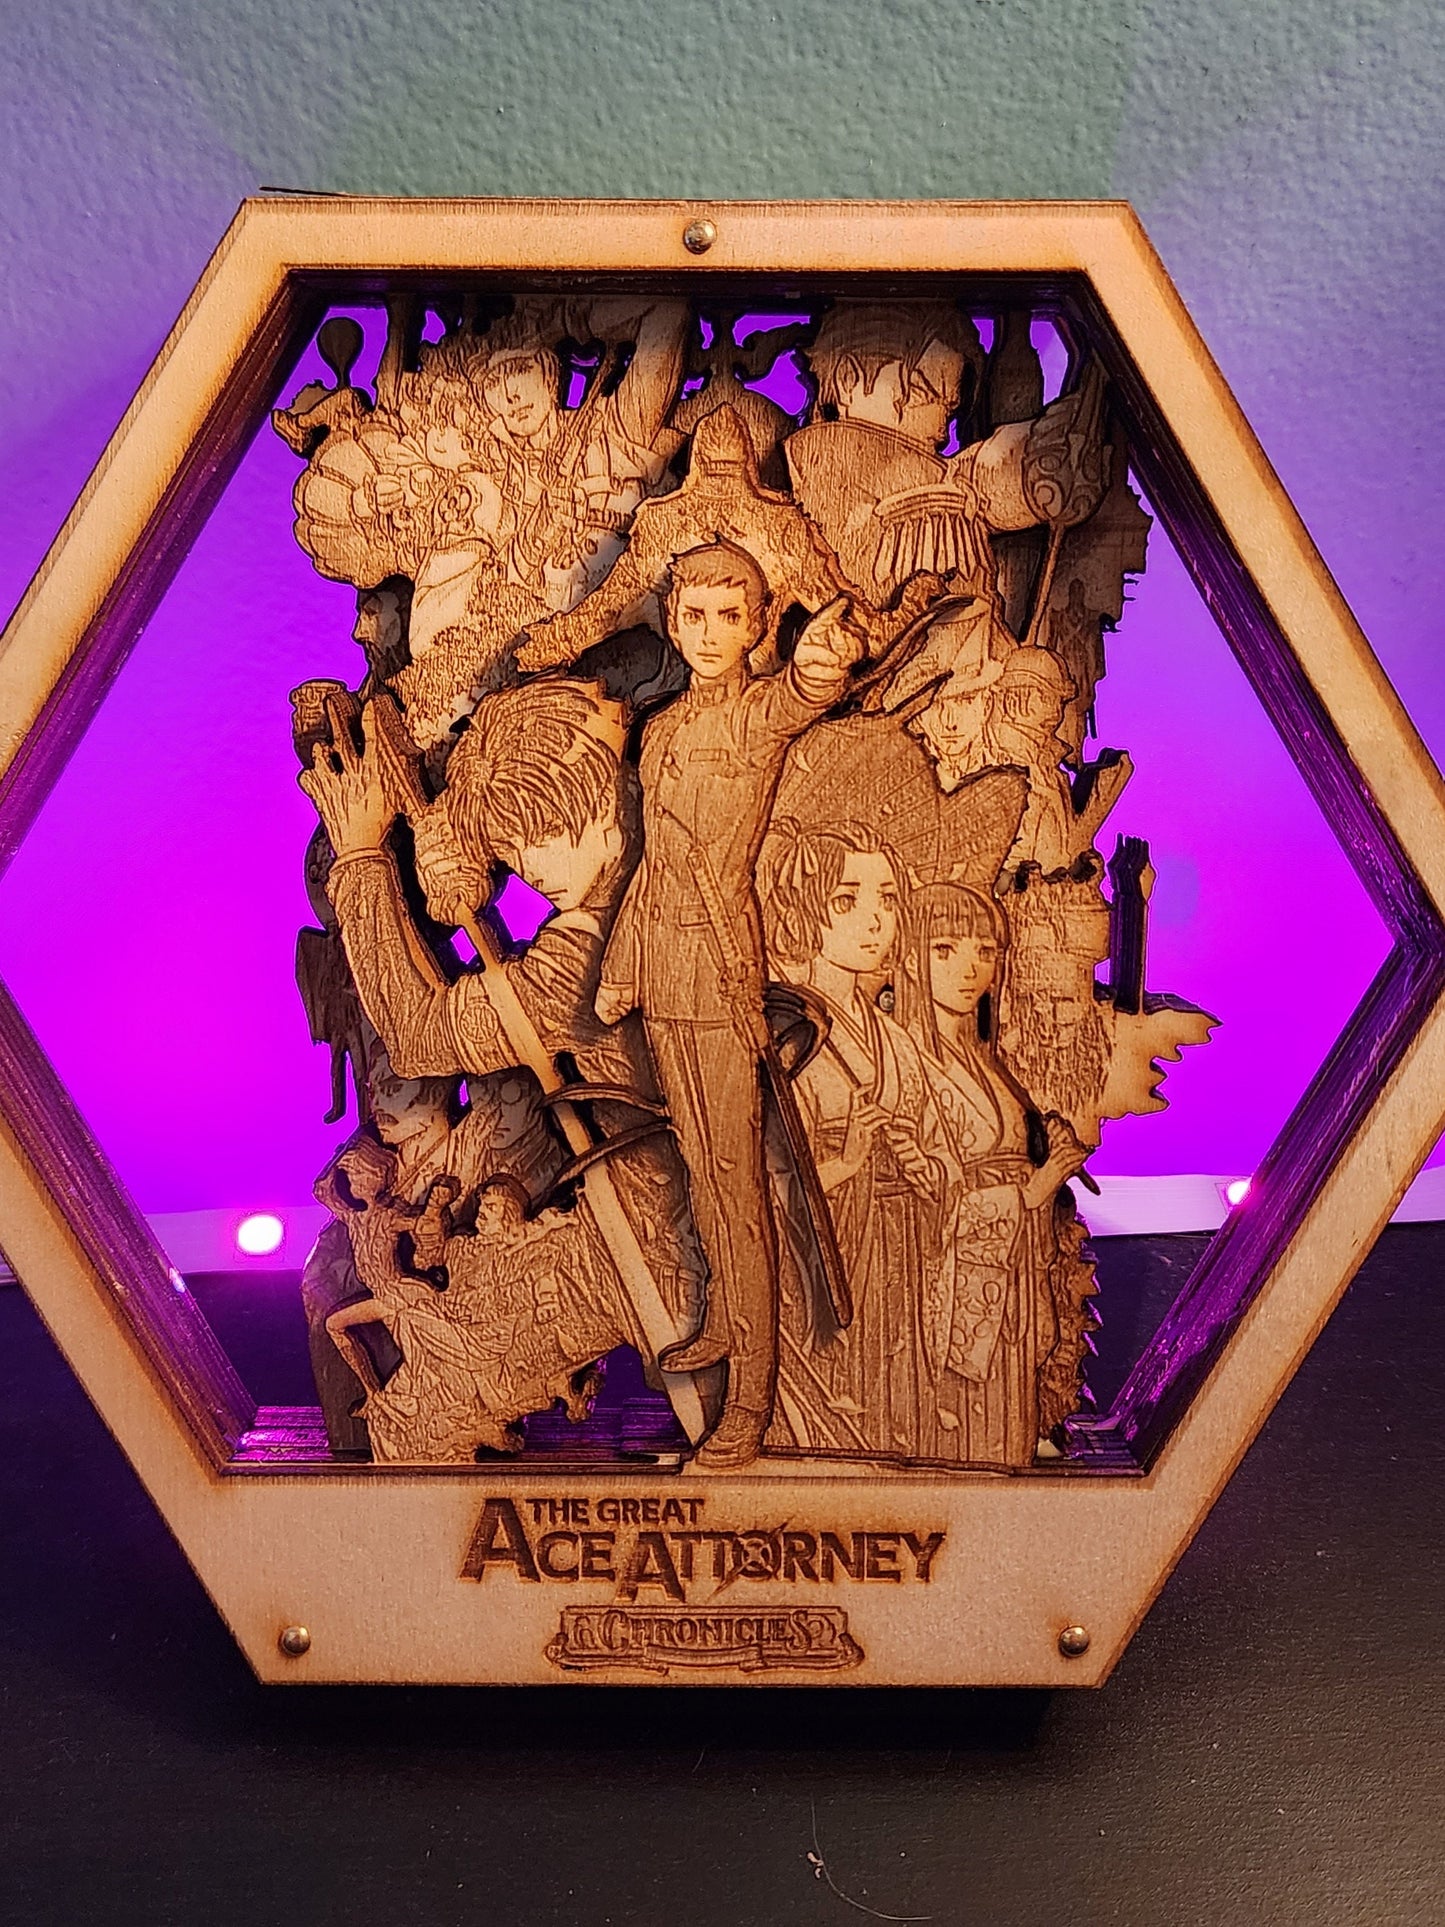 COMMISSION ORDER | 3D Wooden Artwork PlaqueArts | Unique gift for gamers